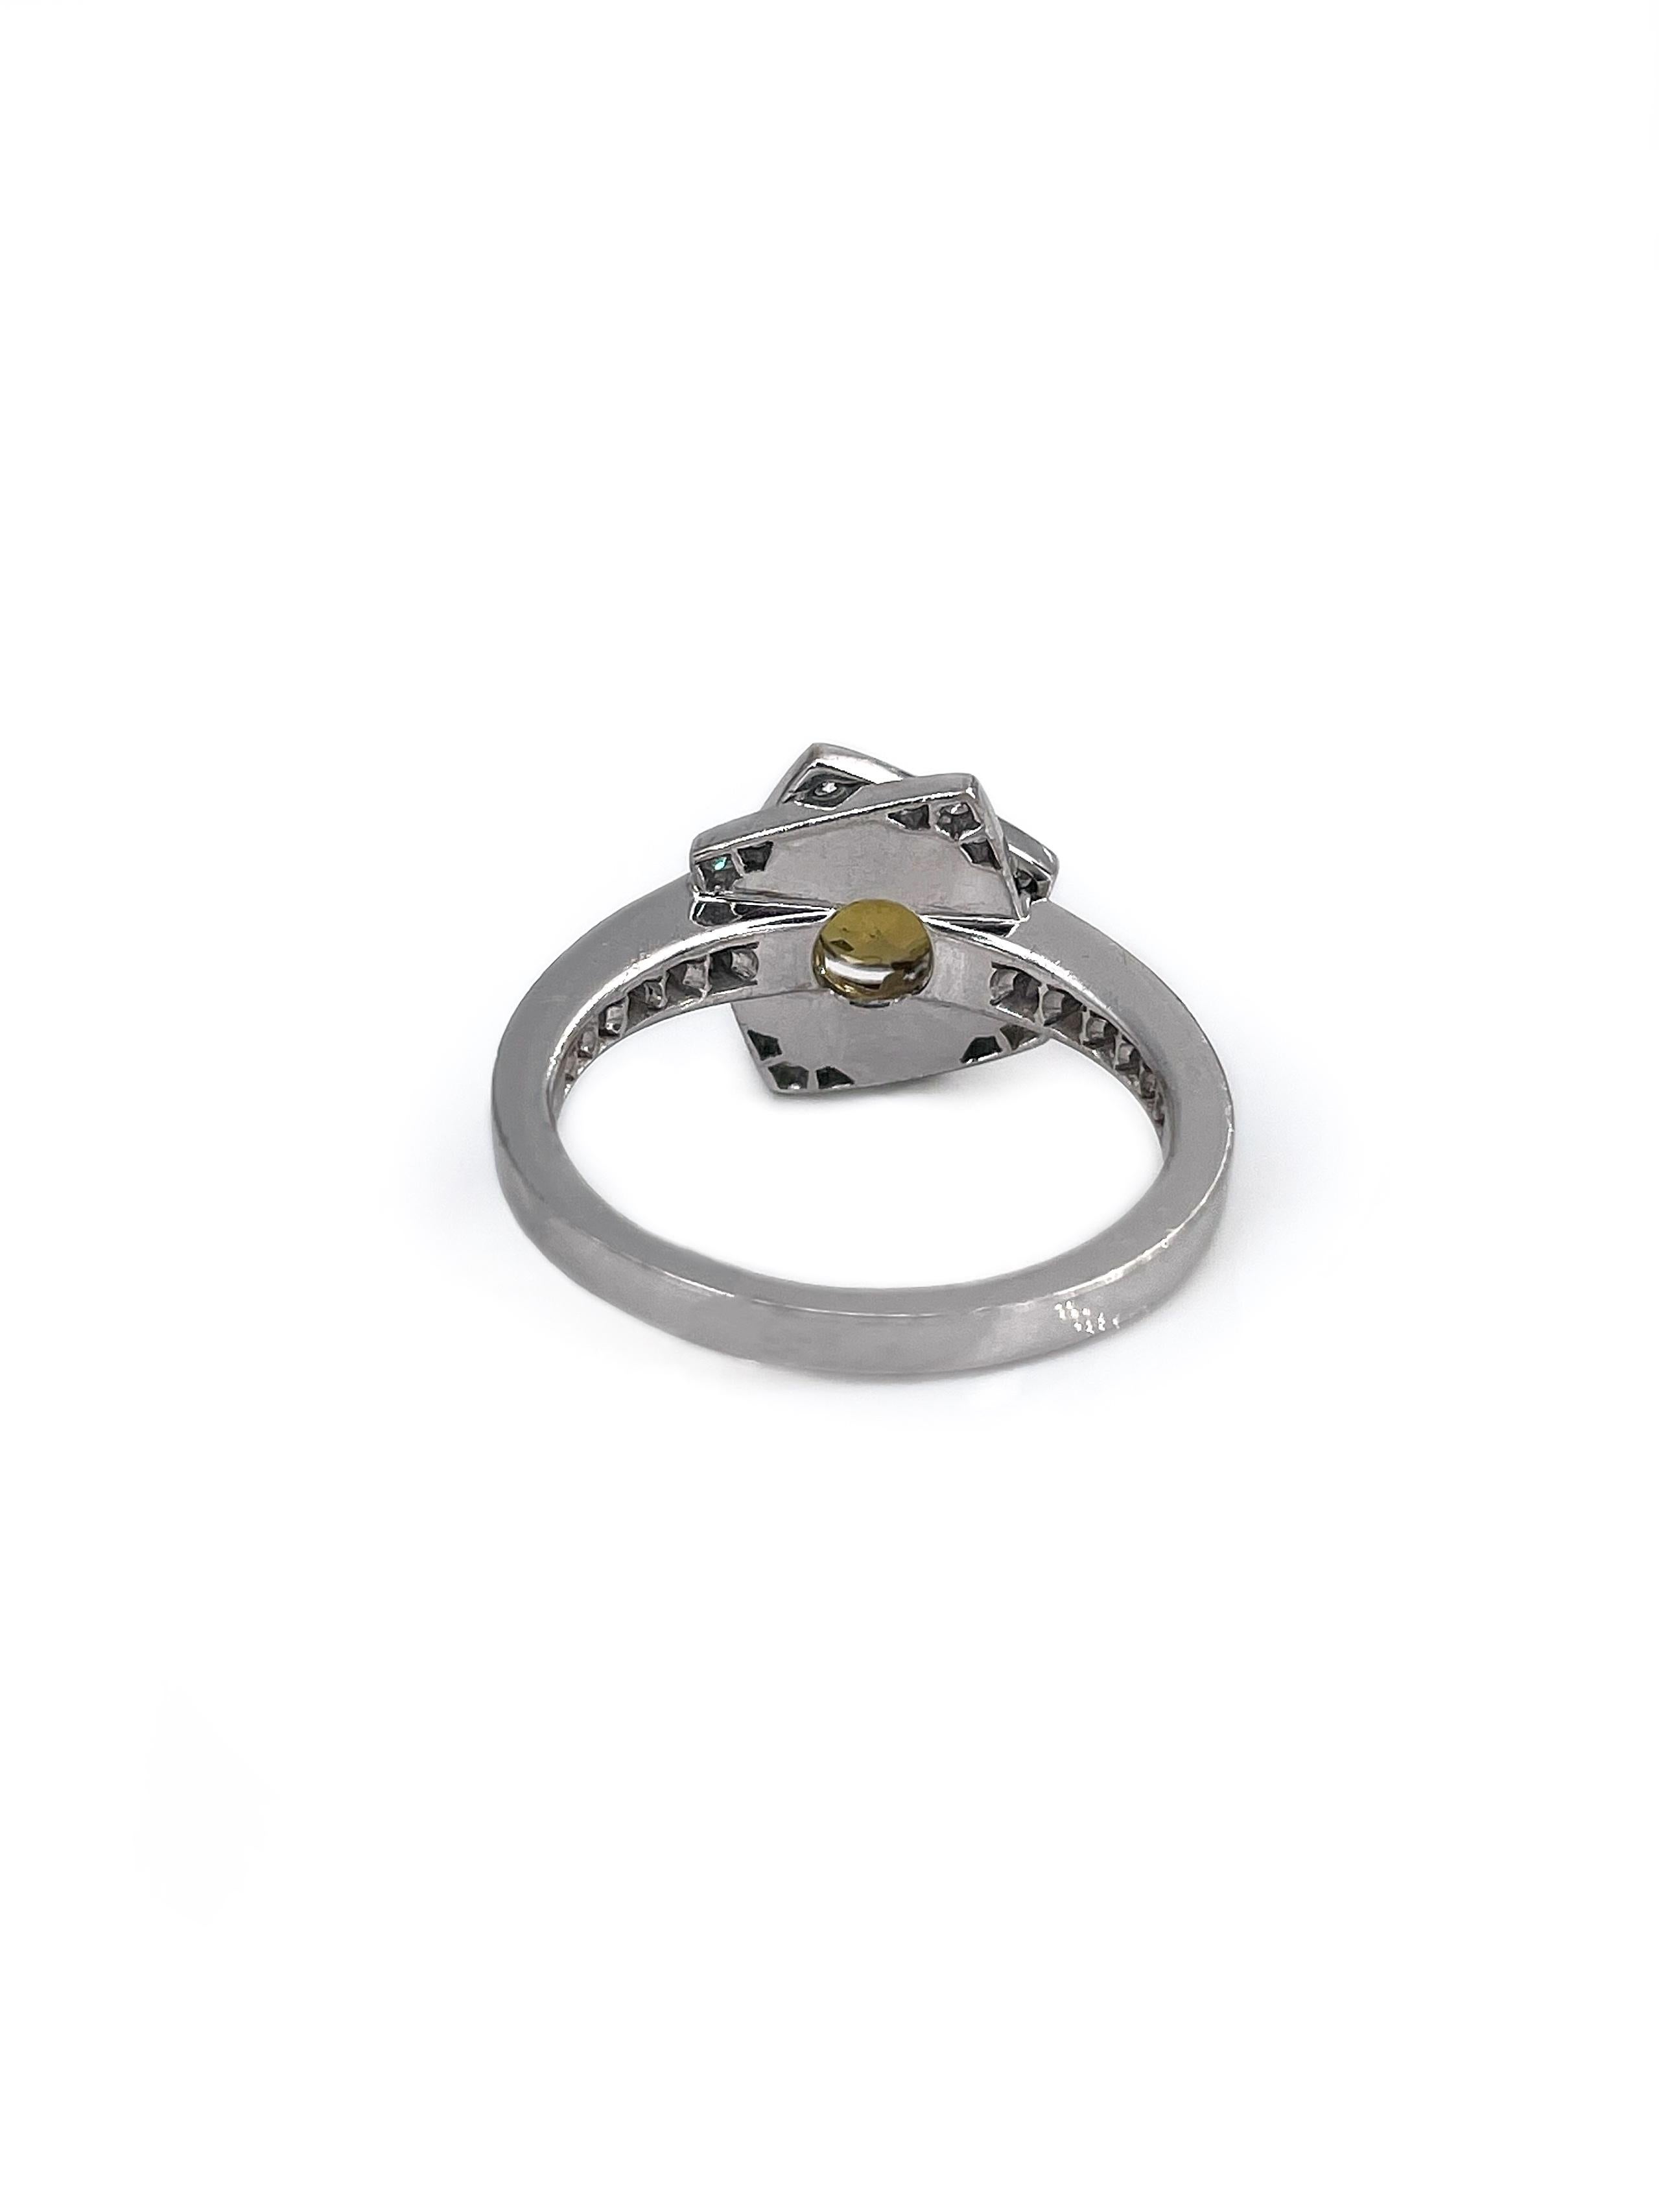 This is an Art Deco style ring crafted in 18K white gold. The piece features beautiful round yellow orange natural sapphire (1.00ct, Y6/5, VS). The gem is accompanied with 40 brilliant cut diamonds (TW 0.50ct, RW, VS). 

Weight: 5.79g
Size: 16.5 (US